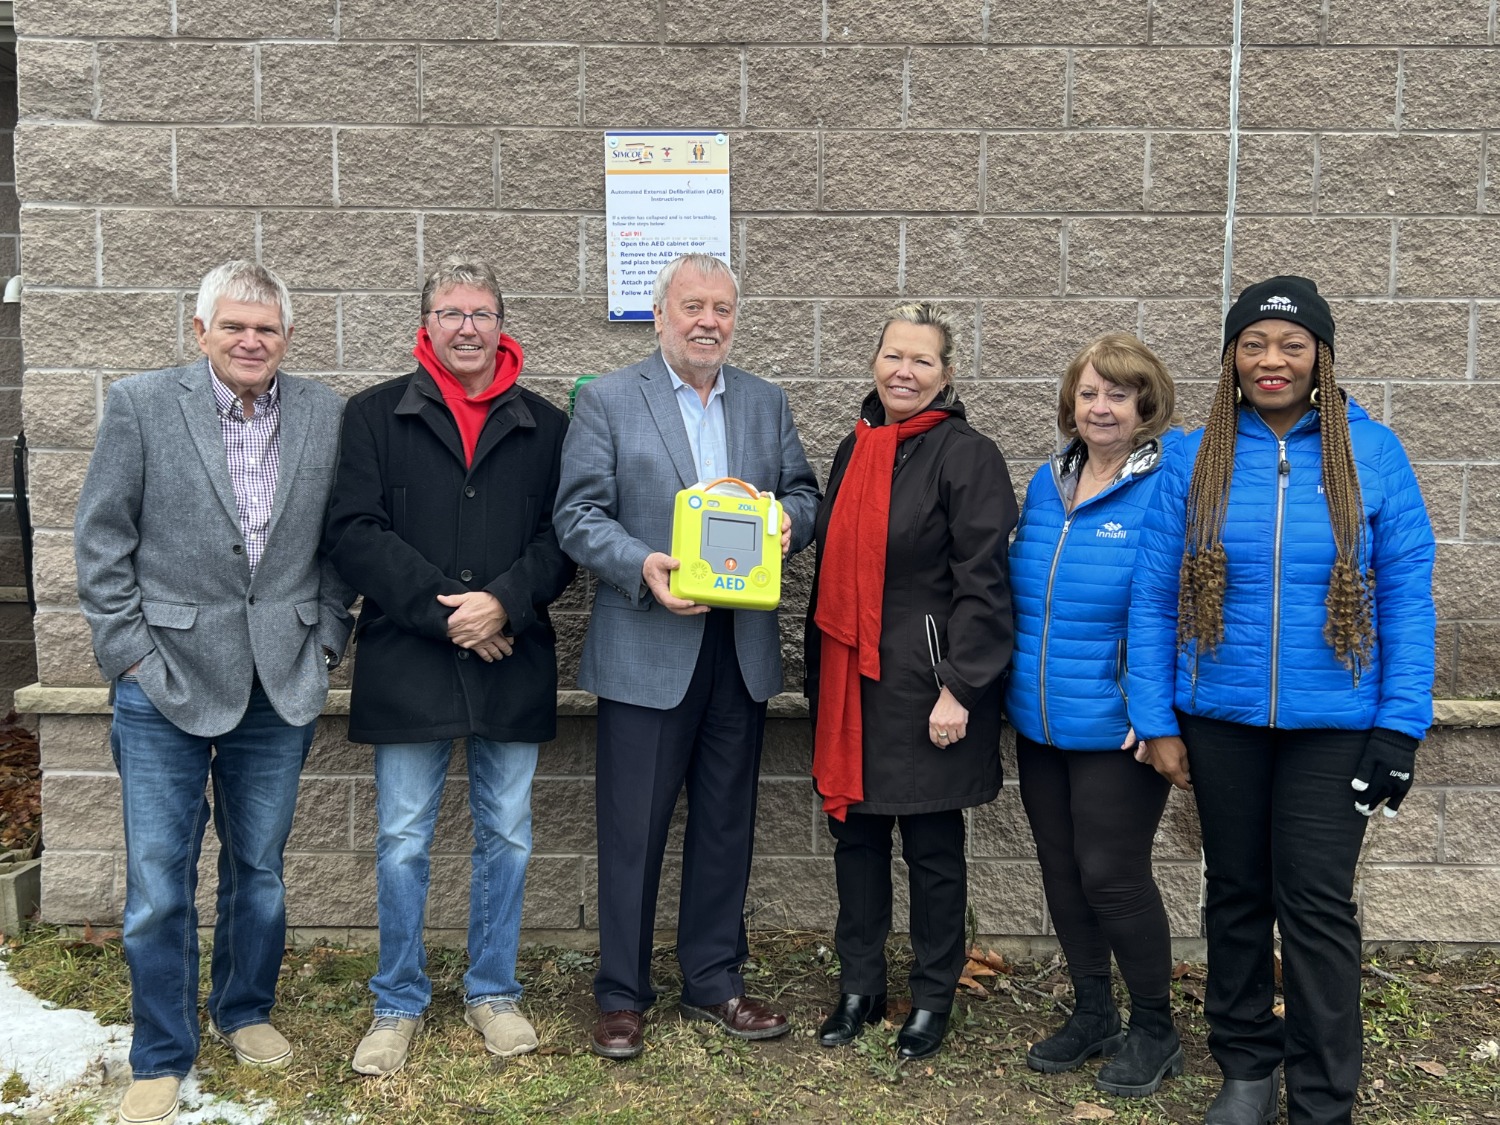 Council members standing with AED unit